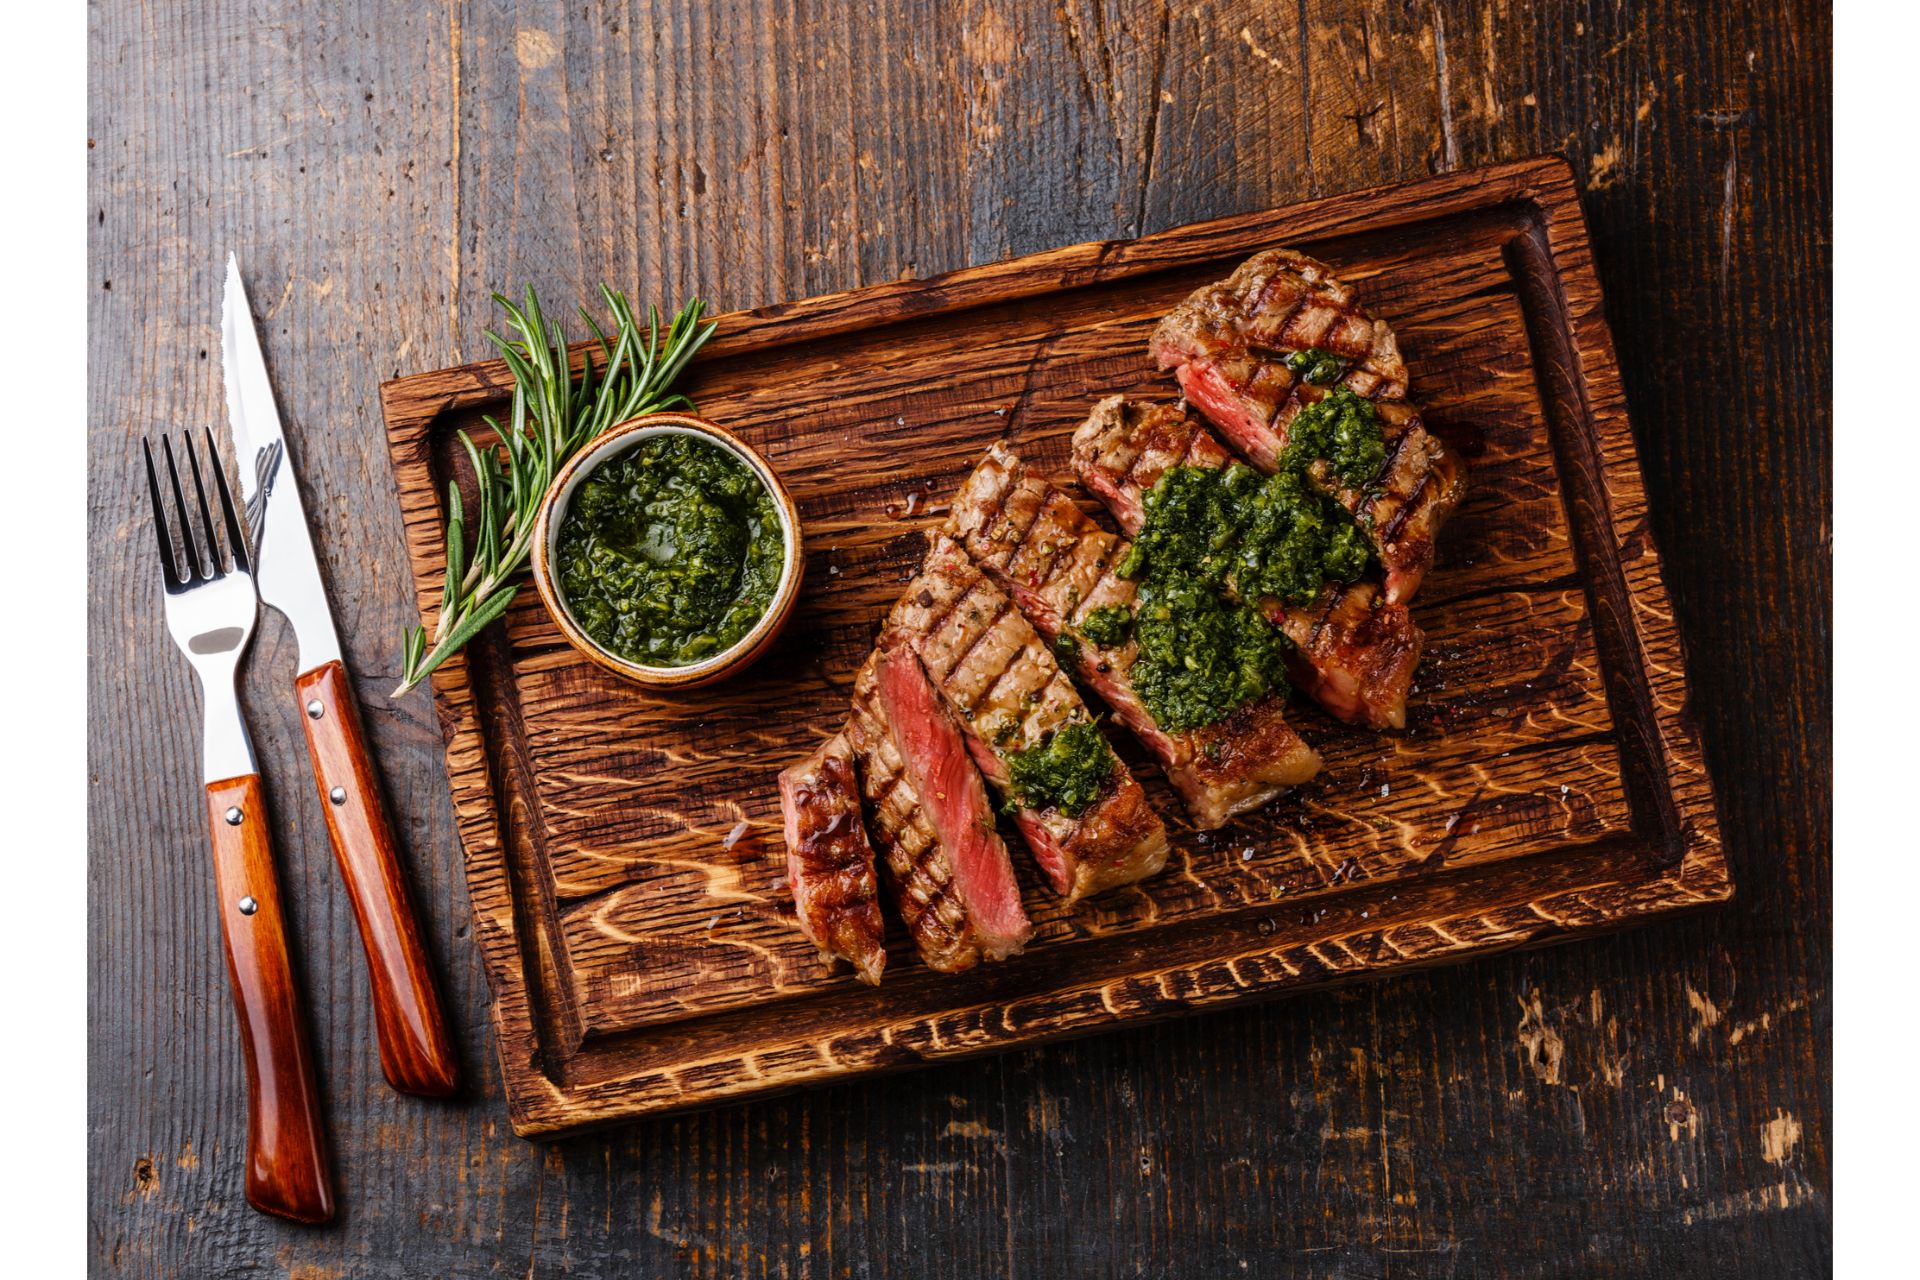 Grilled Steak with Chimichurri - Parents Canada